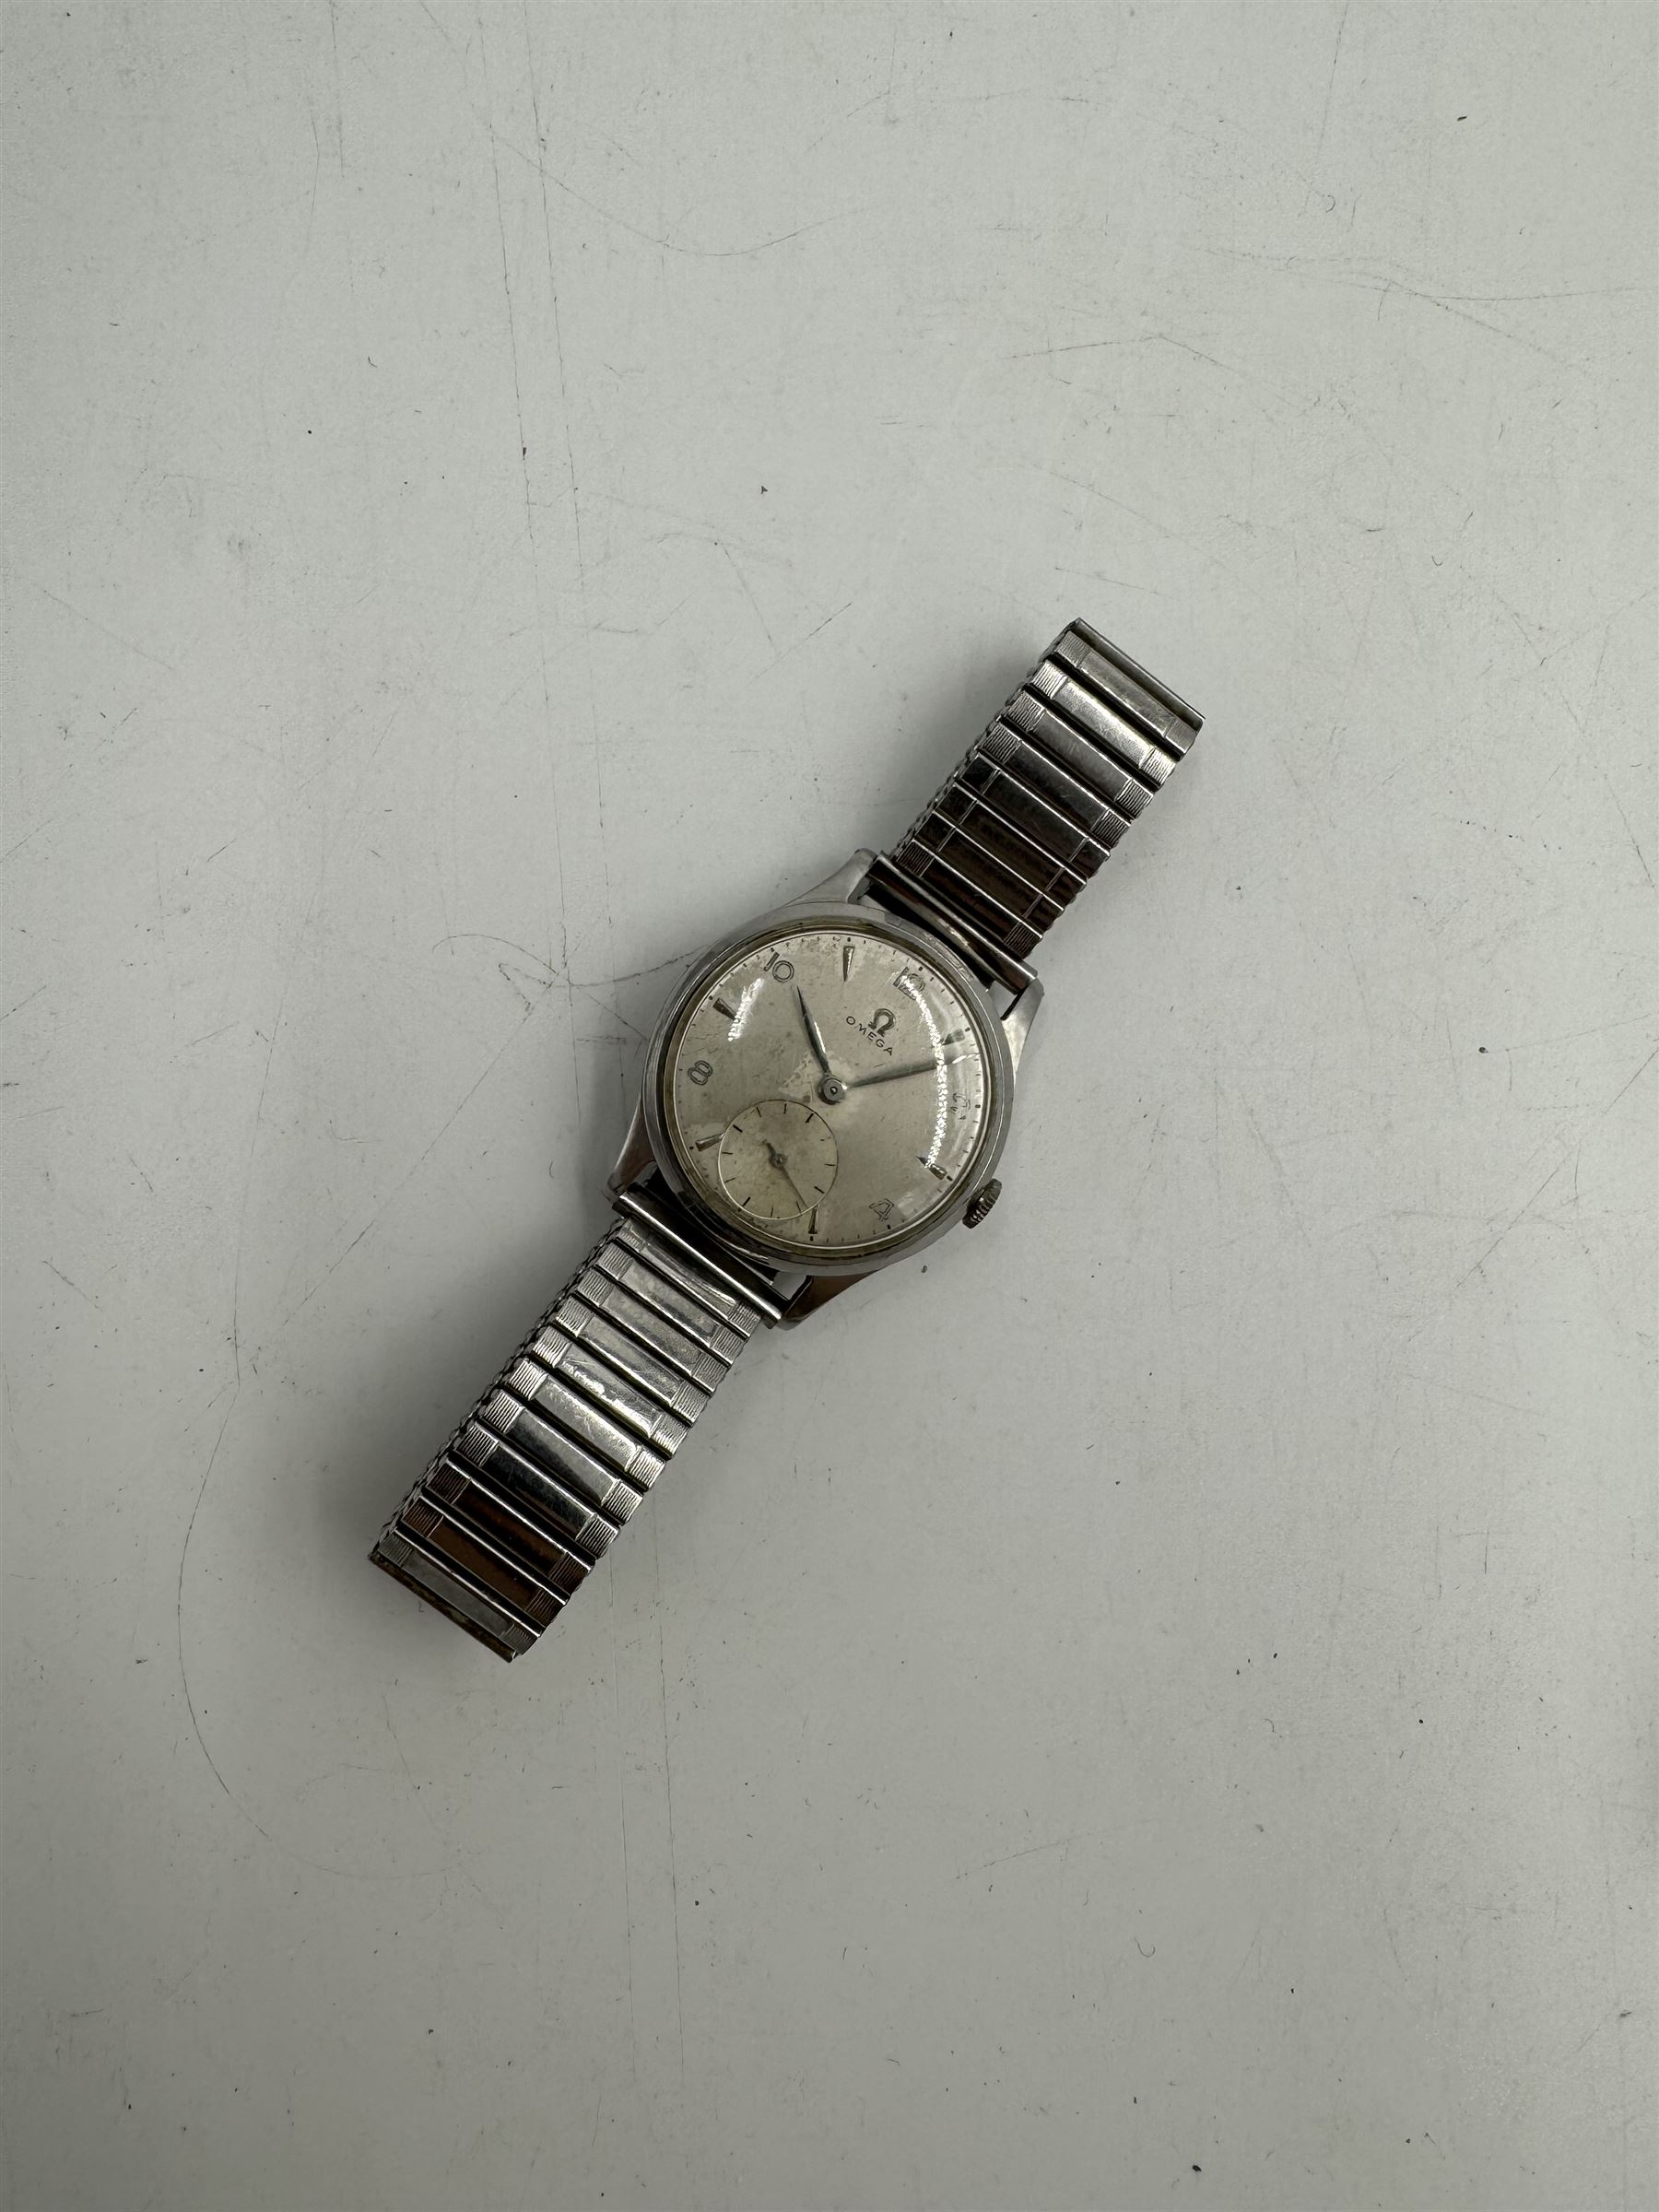 Omega gentleman's stainless steel manual wind wristwatch - Image 3 of 3